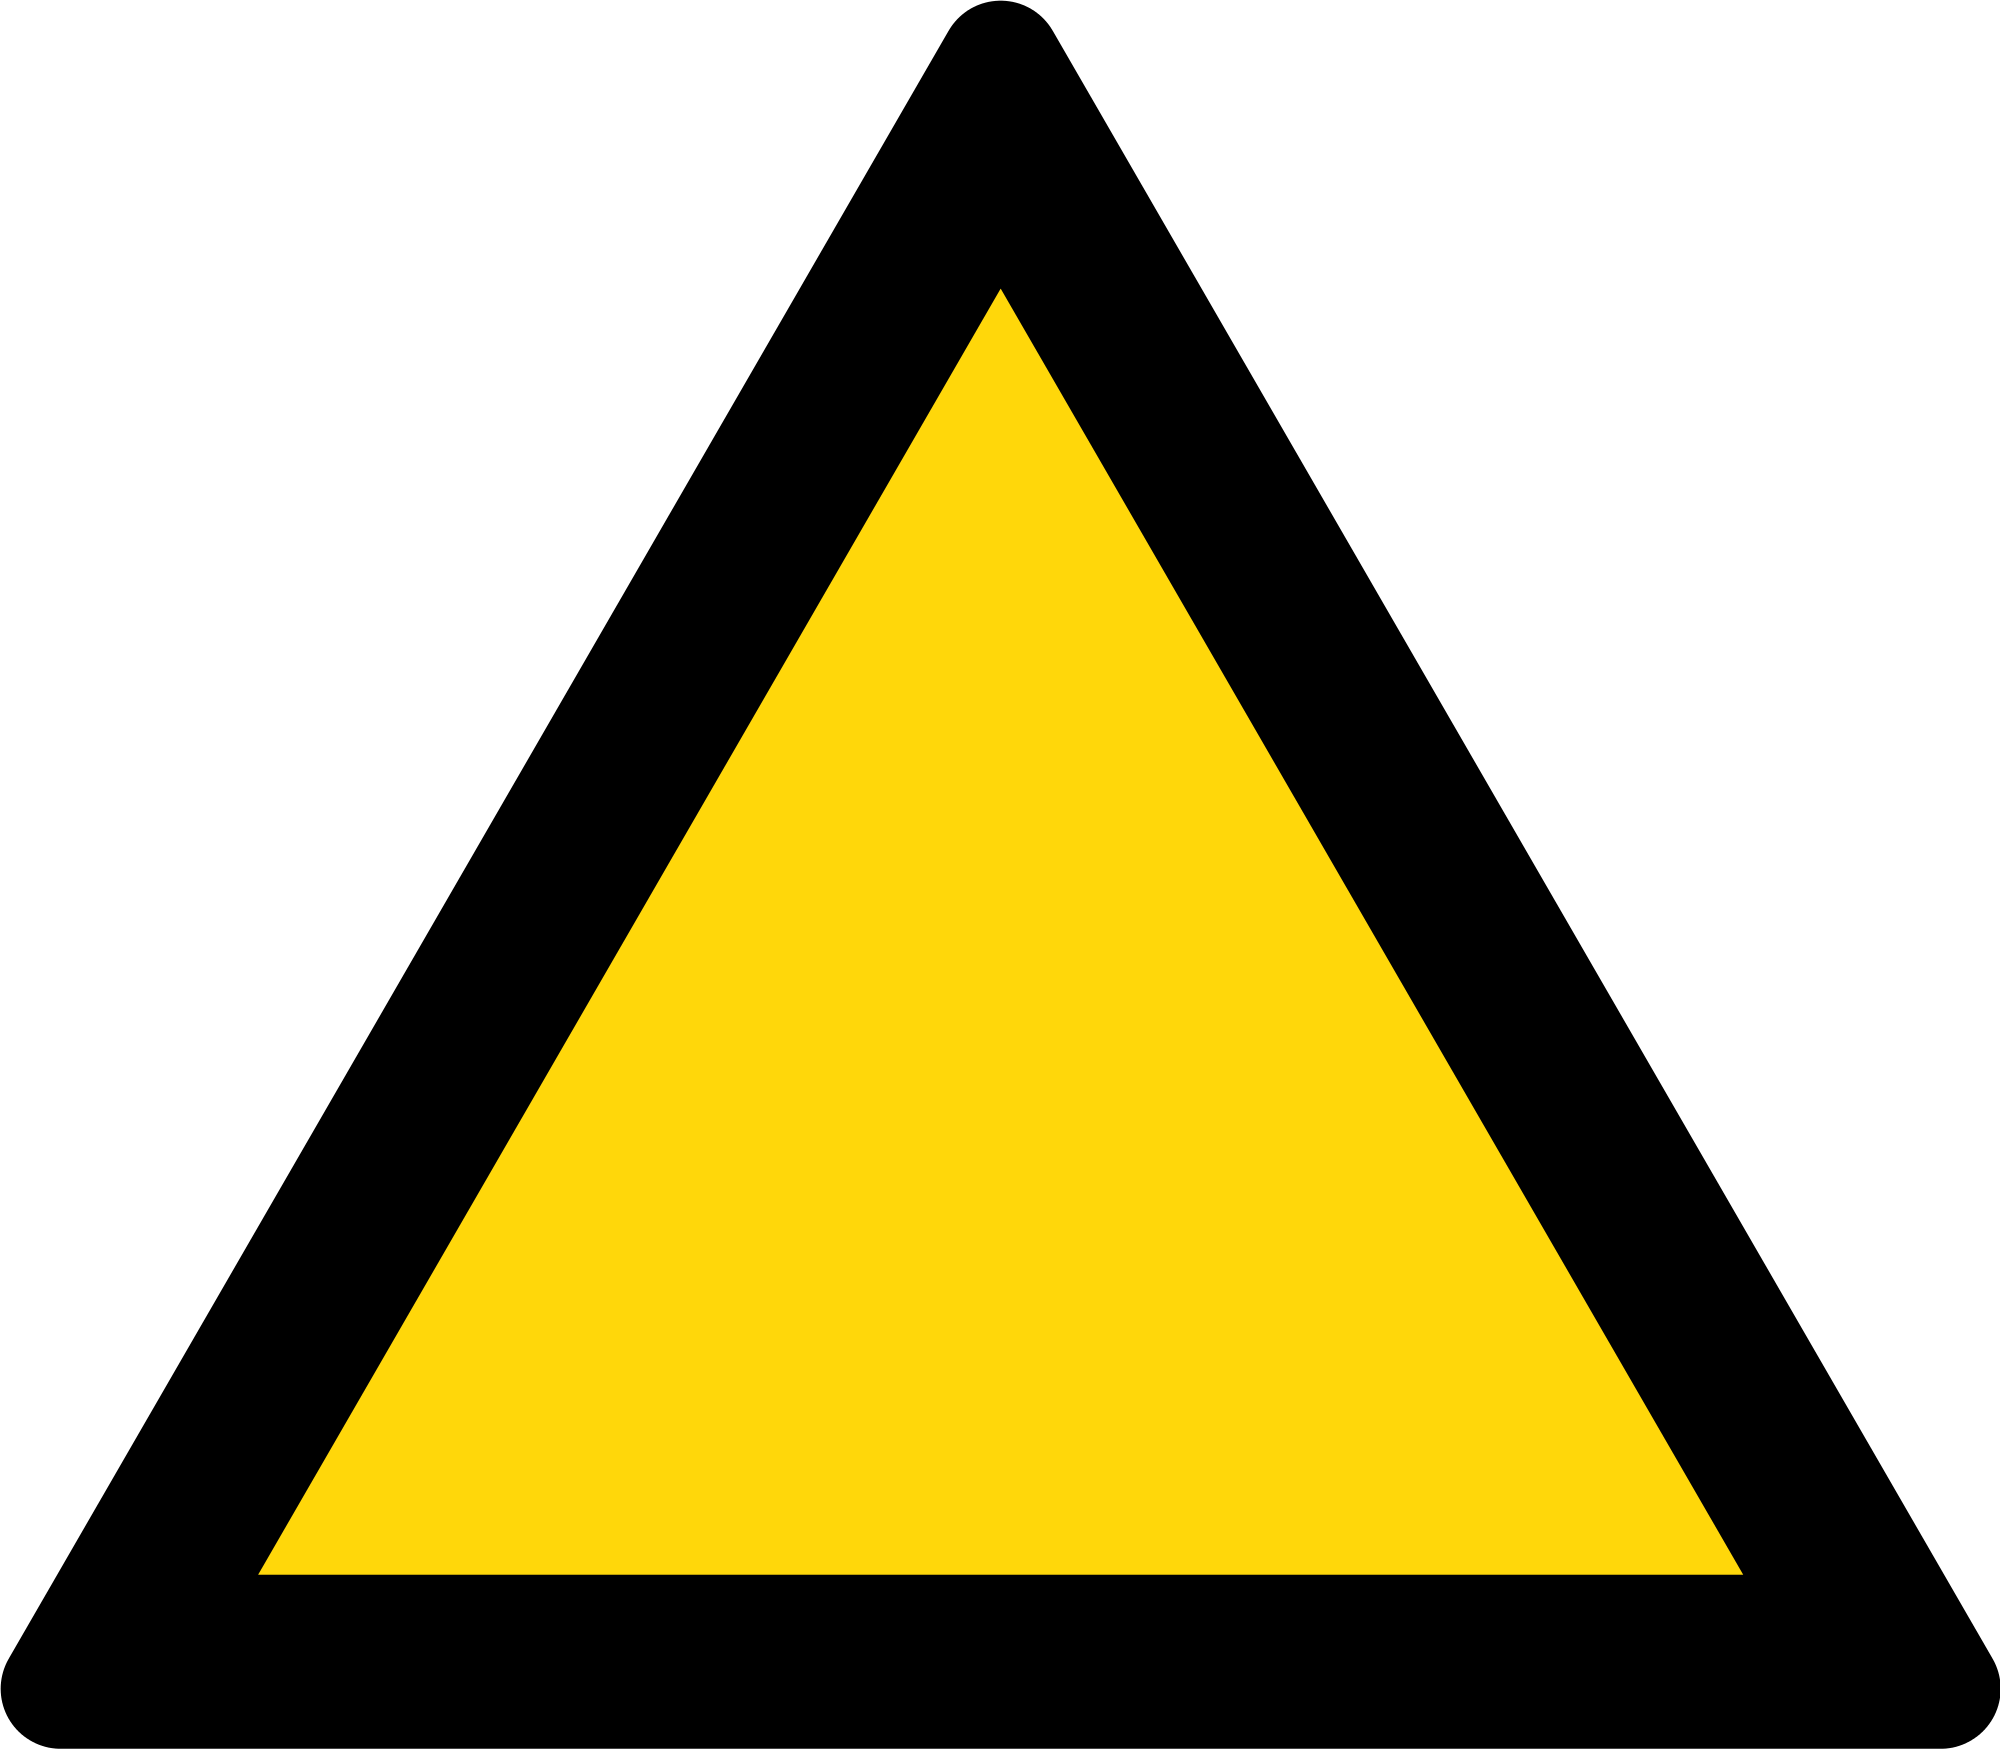 Blue and Black with Triangle Logo - File:Triangle warning sign (black and yellow).svg - Wikimedia Commons